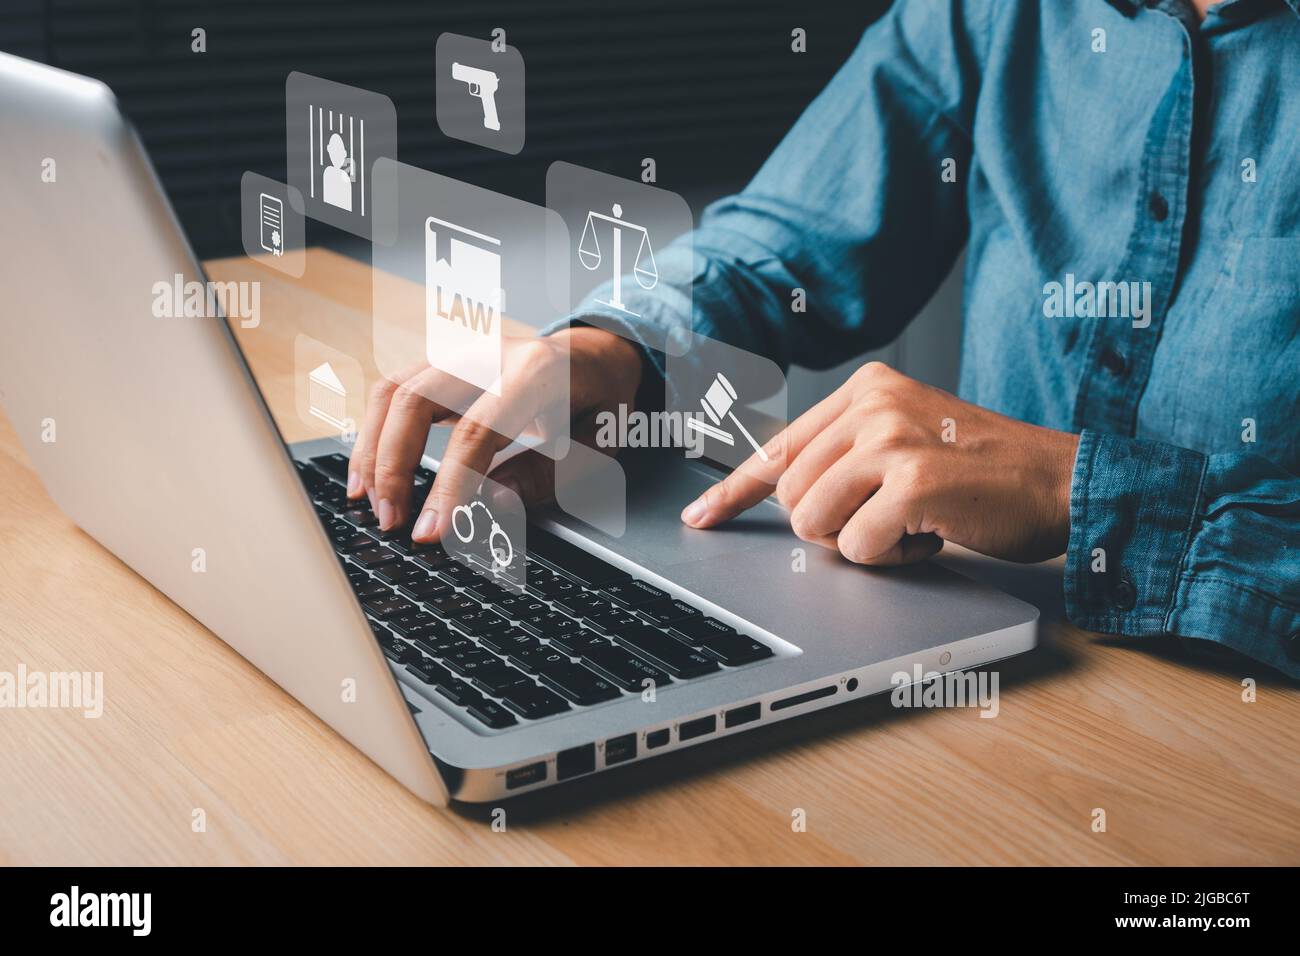 Female lawyer hand using laptop computer with holographic law icon on office desk, terrorism, crime, judgment, verdict, justice and law concept. Stock Photo